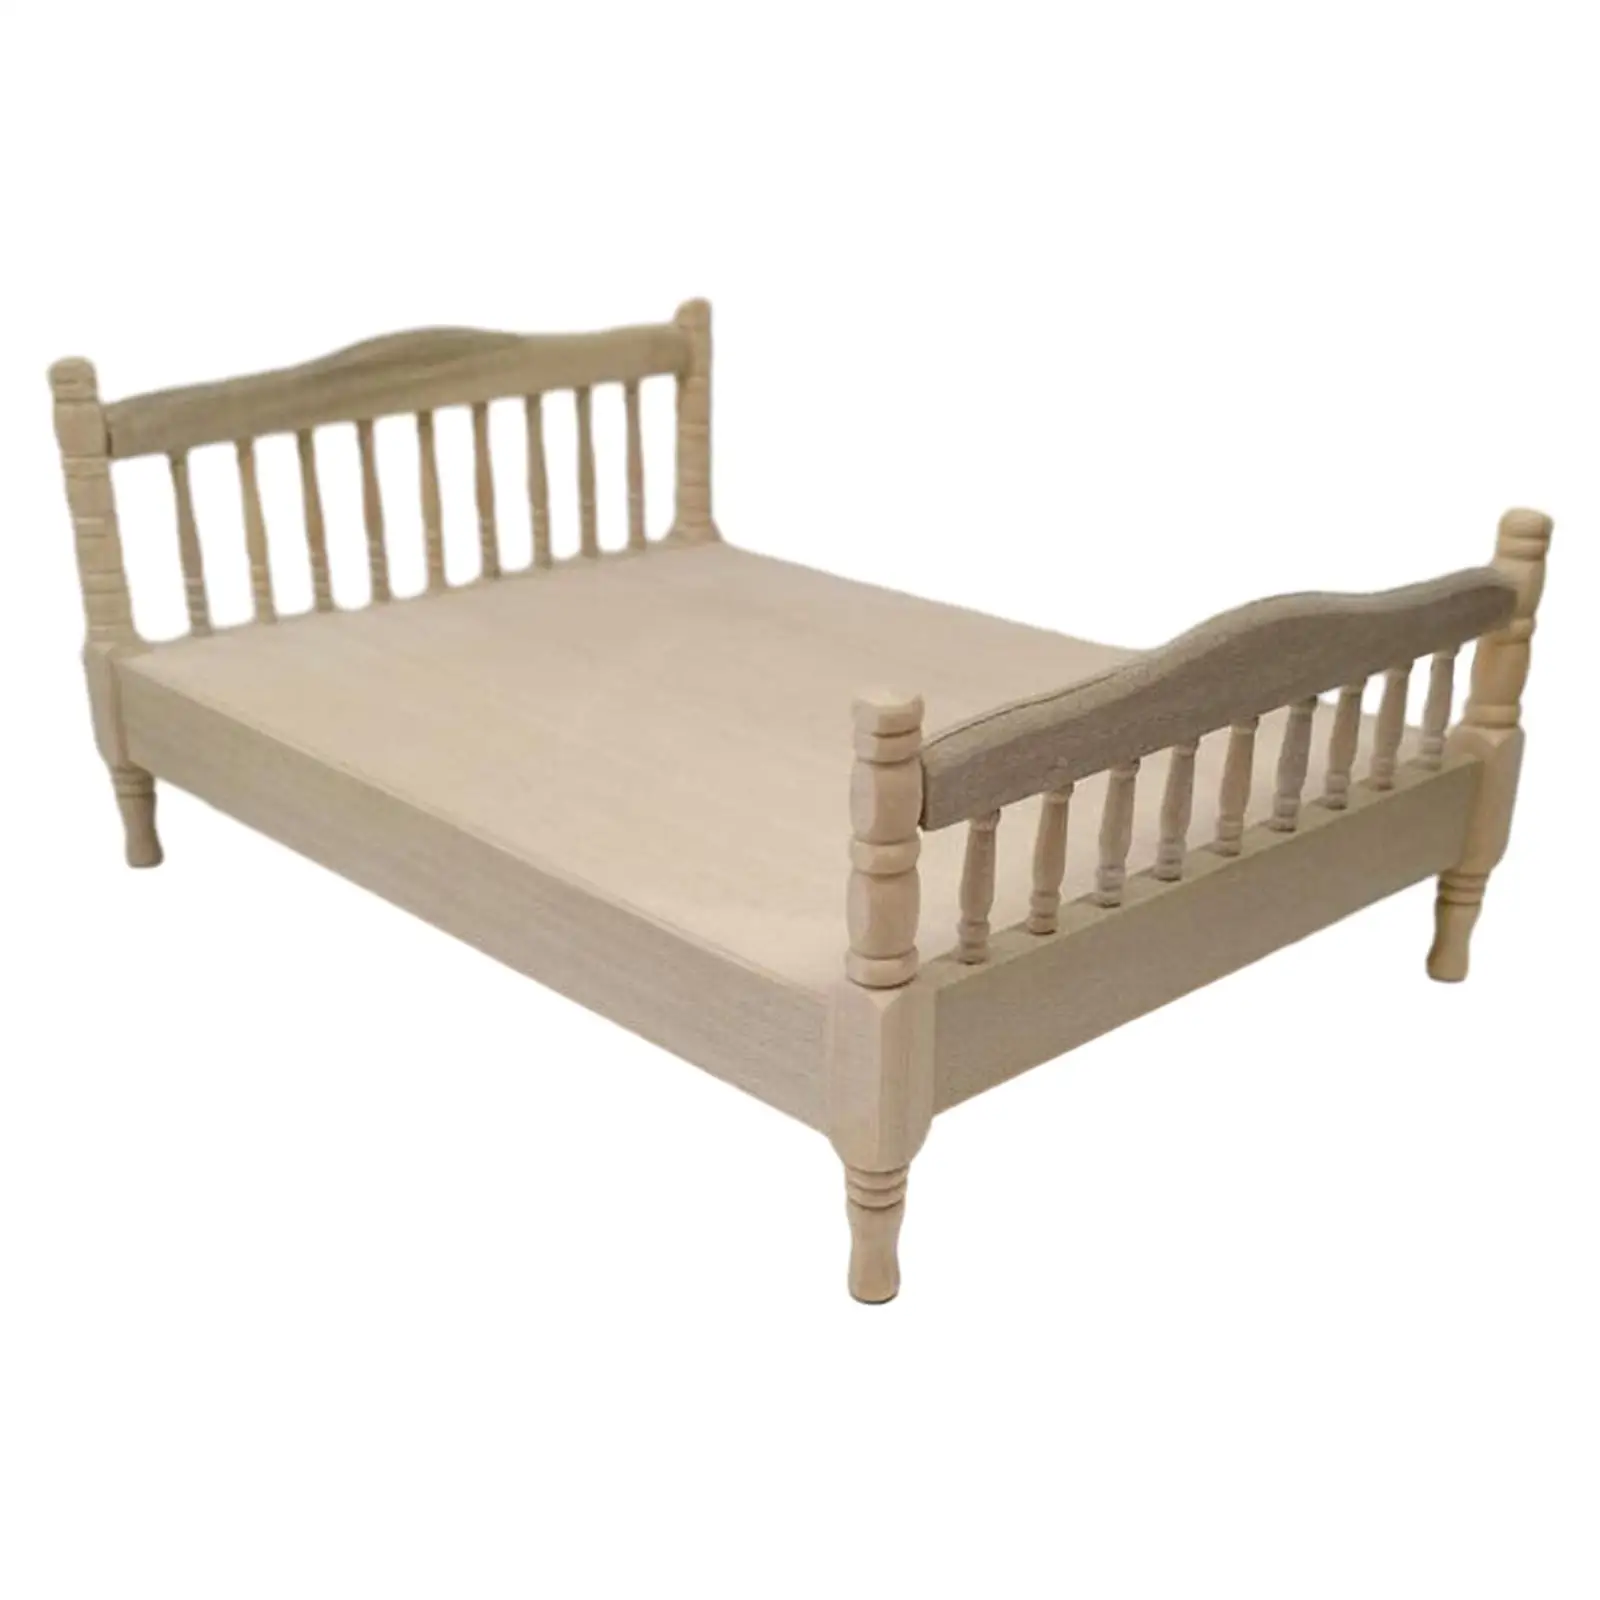 1:12 European Double Bed Model, Miniature Bedroom Furniture, Wooden Mini Bed for Accessories